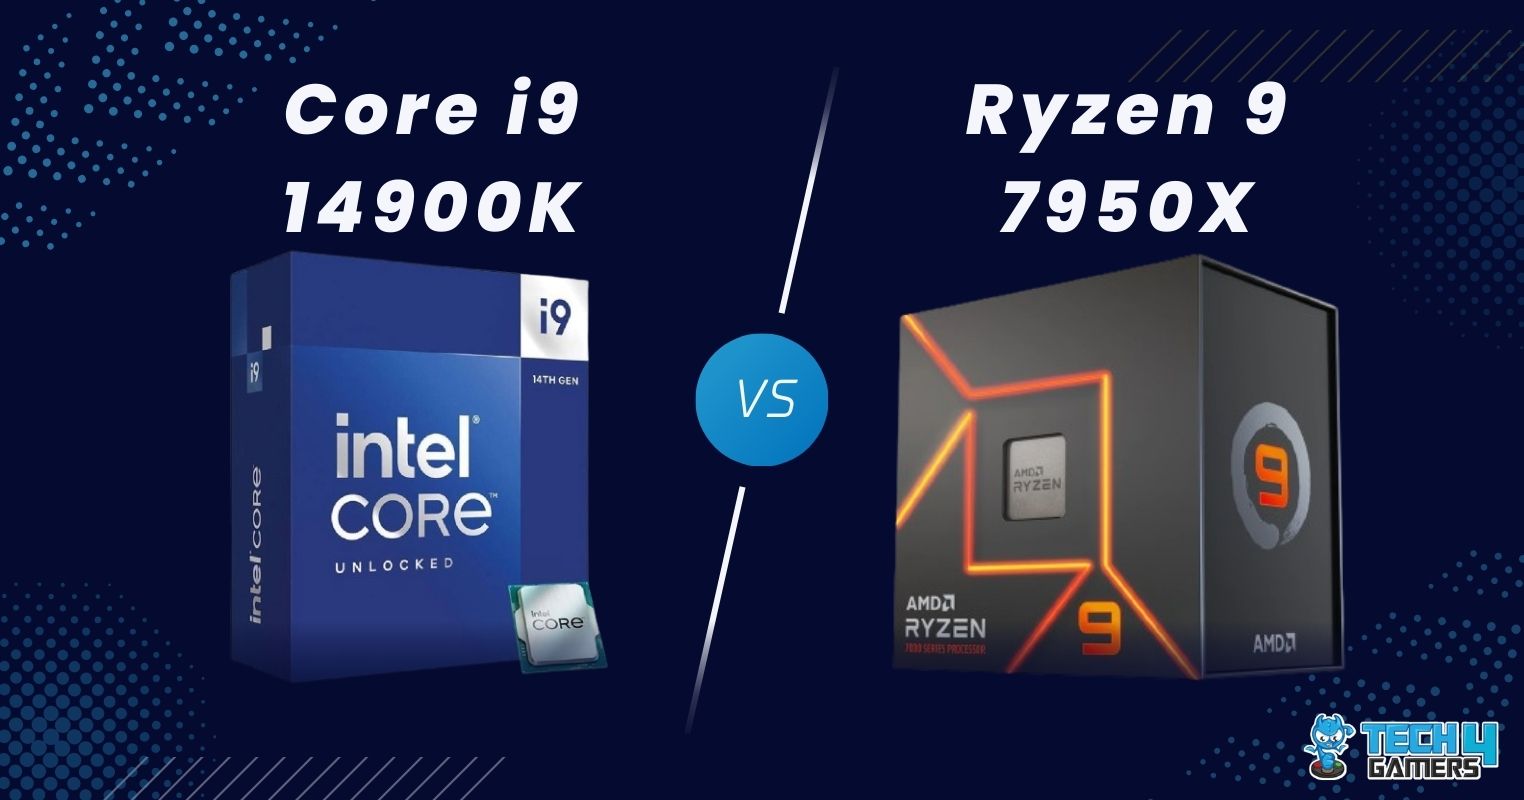 Intel Core i9-14900K is reportedly only 2% faster than AMD Ryzen 9 7950X3D